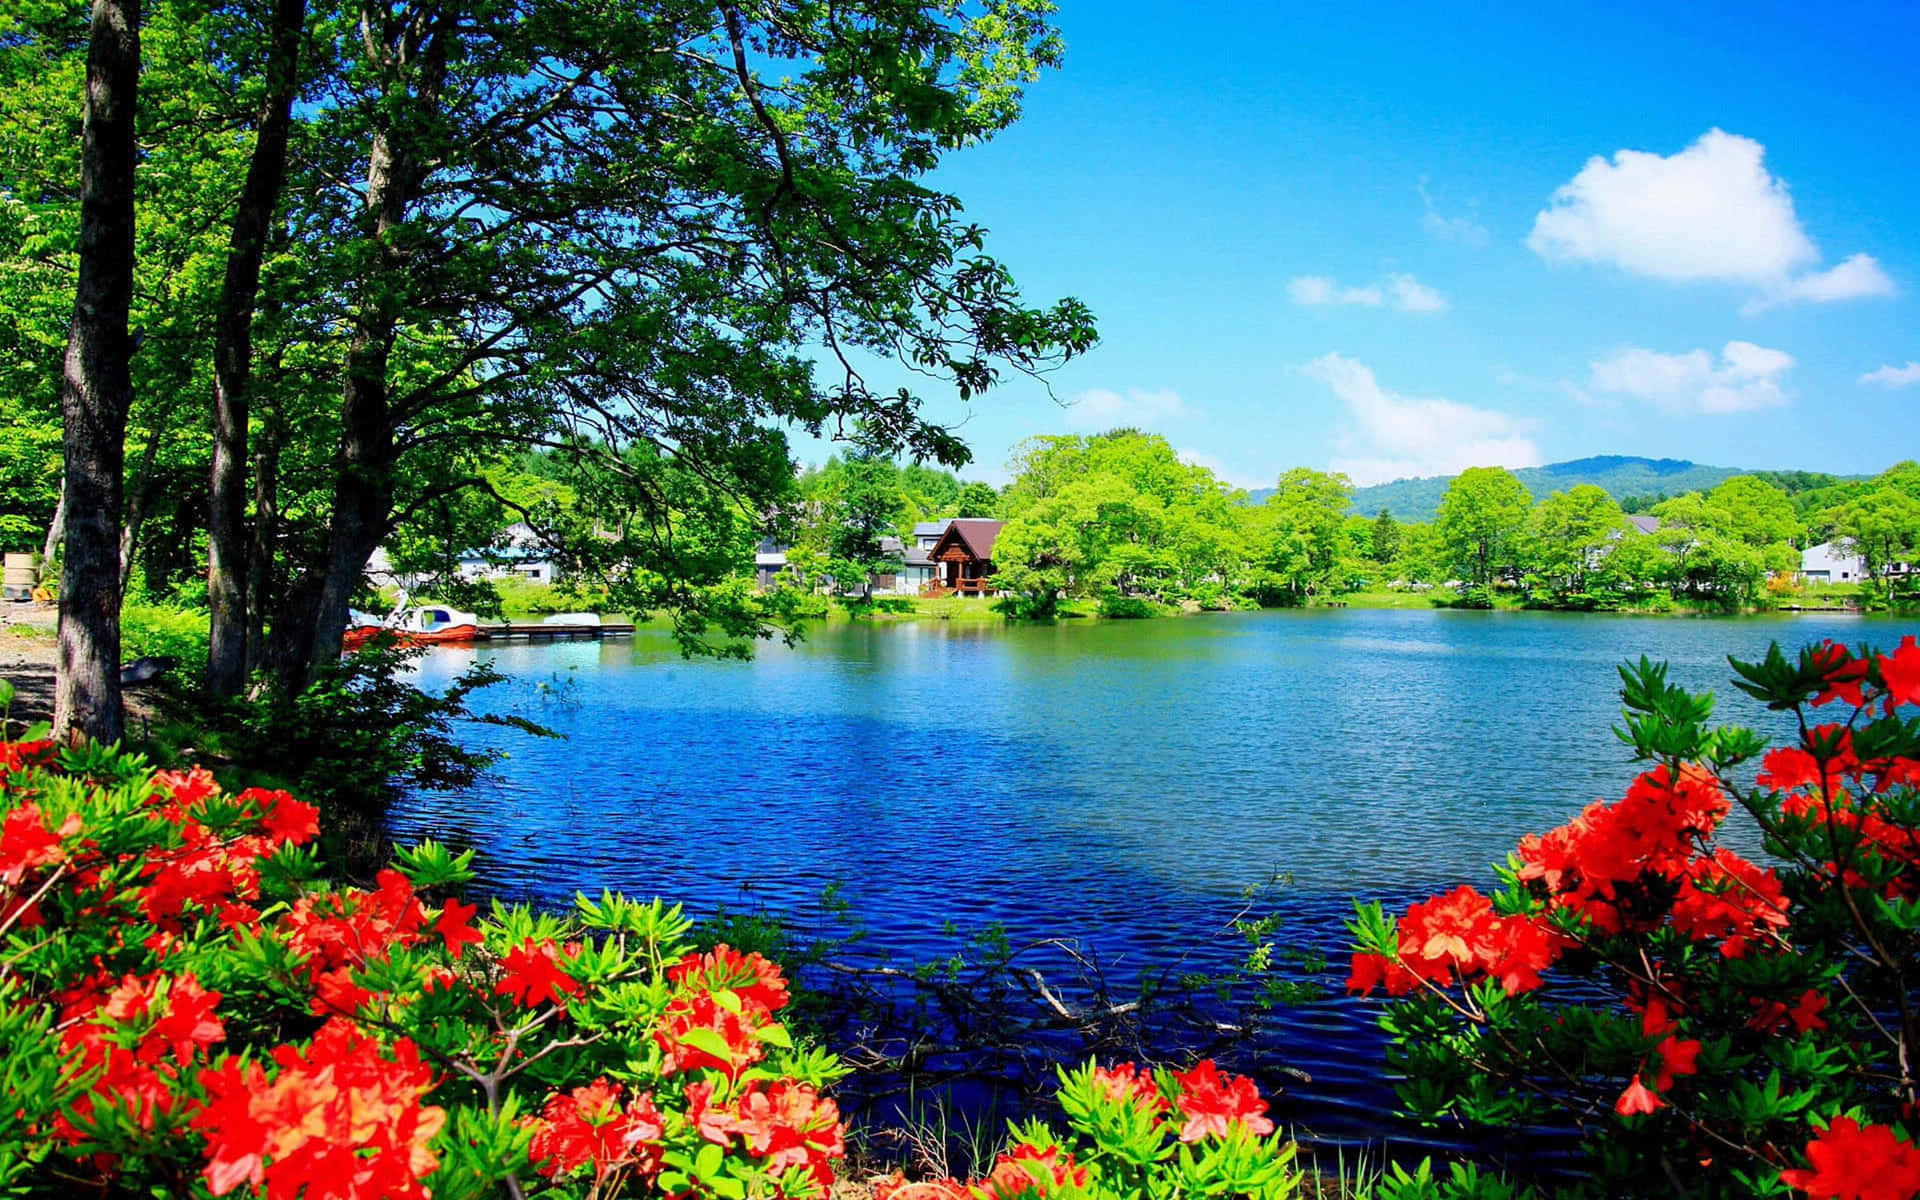 a lake surrounded by red flowers and trees